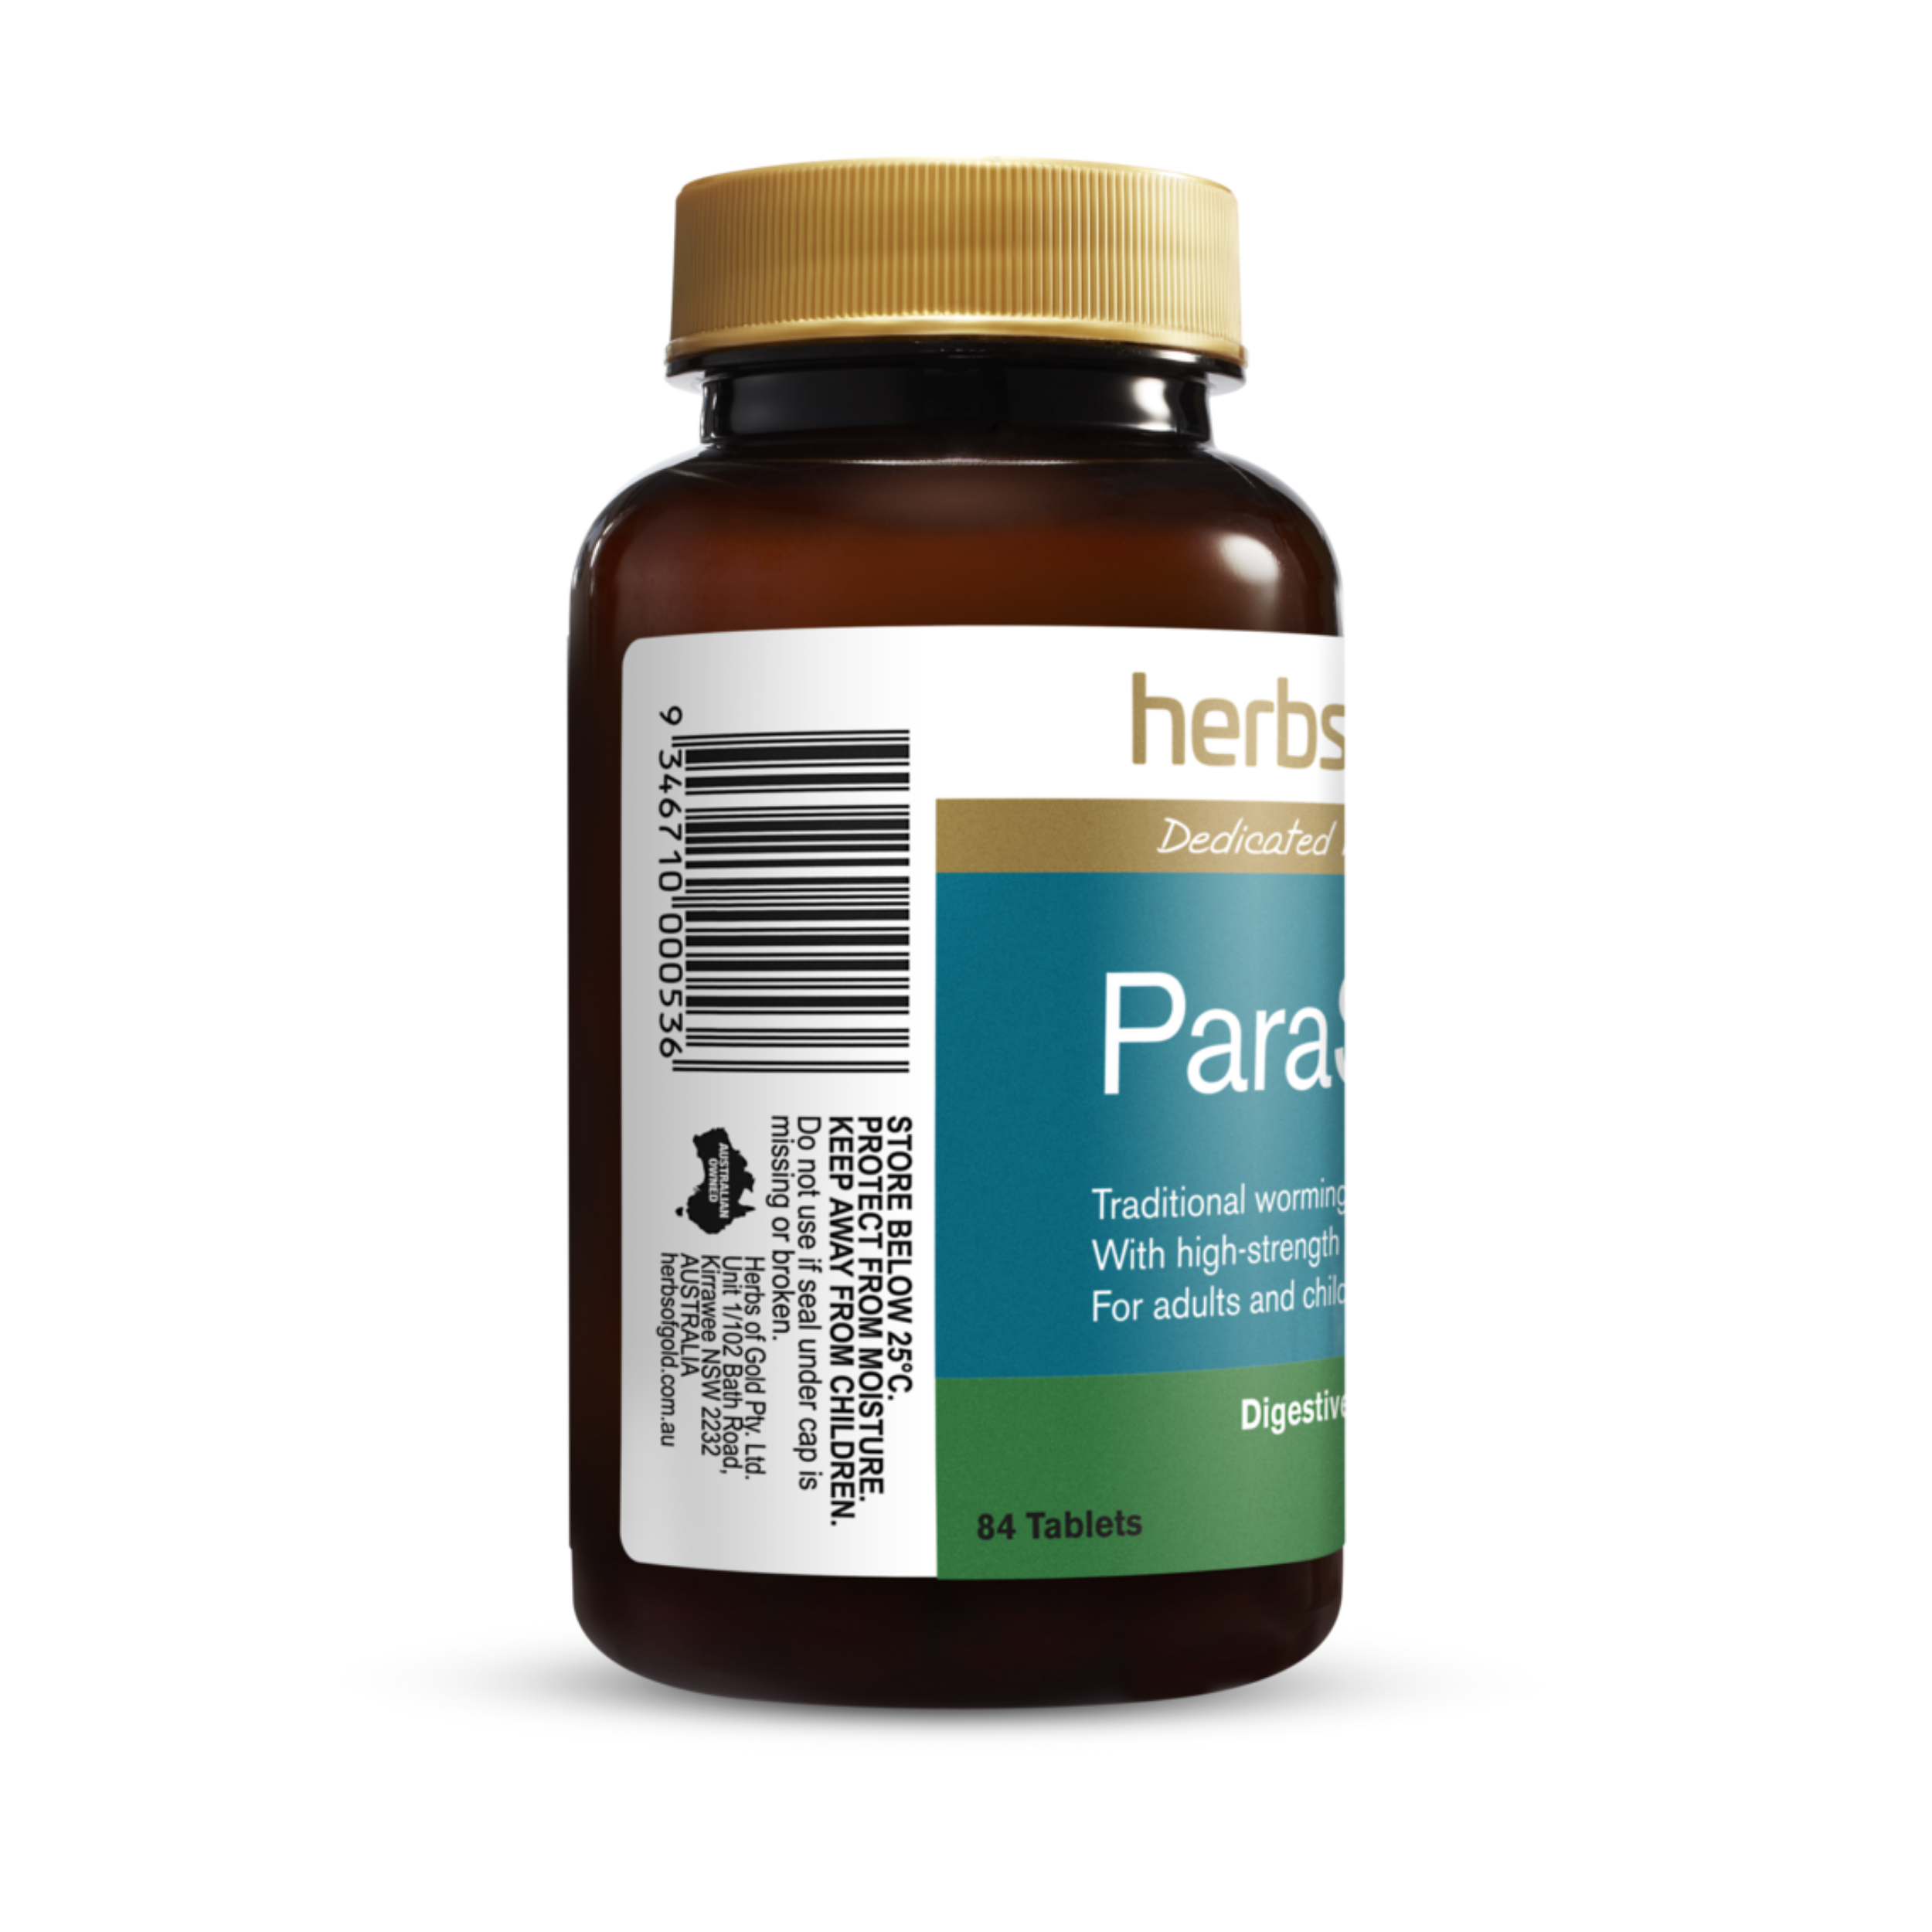 Herbs Of Gold ParaStrike 28 Tablets